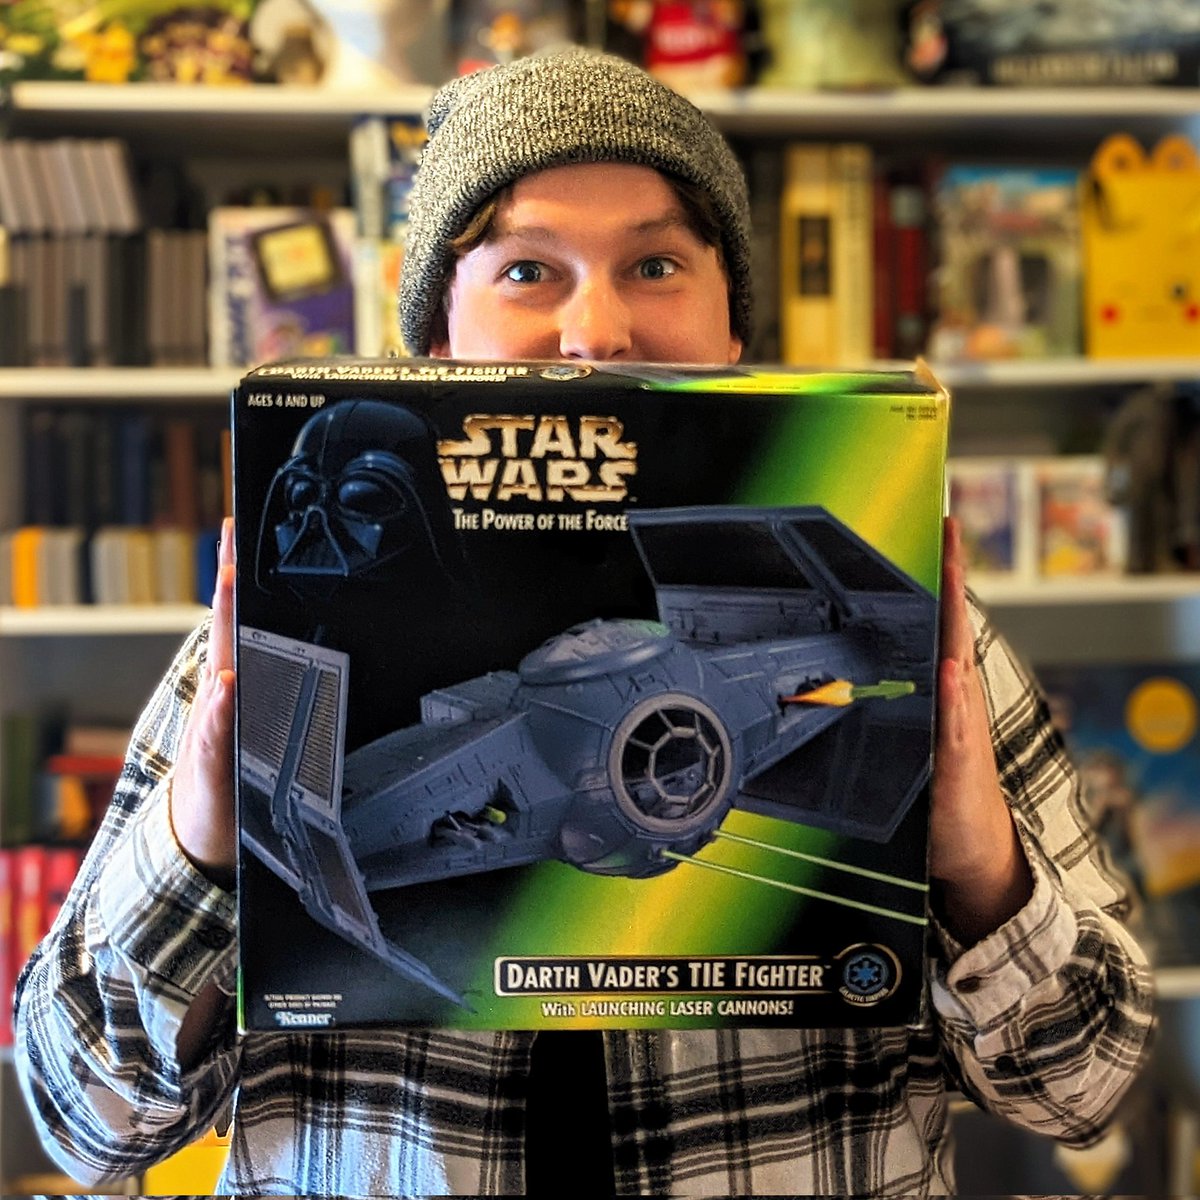 1996 Kenner Darth Vader Tie Fighter! 🤩💥 I was lucky enough to pick this up at Chicago Vintage Fest in Bridgeport last August. So glad the box is still in great shape after 27 years! #starwars #starwarstoys #starwarsnerd #starwarsfan #jedi #actionfigure #actionfigures #Disney